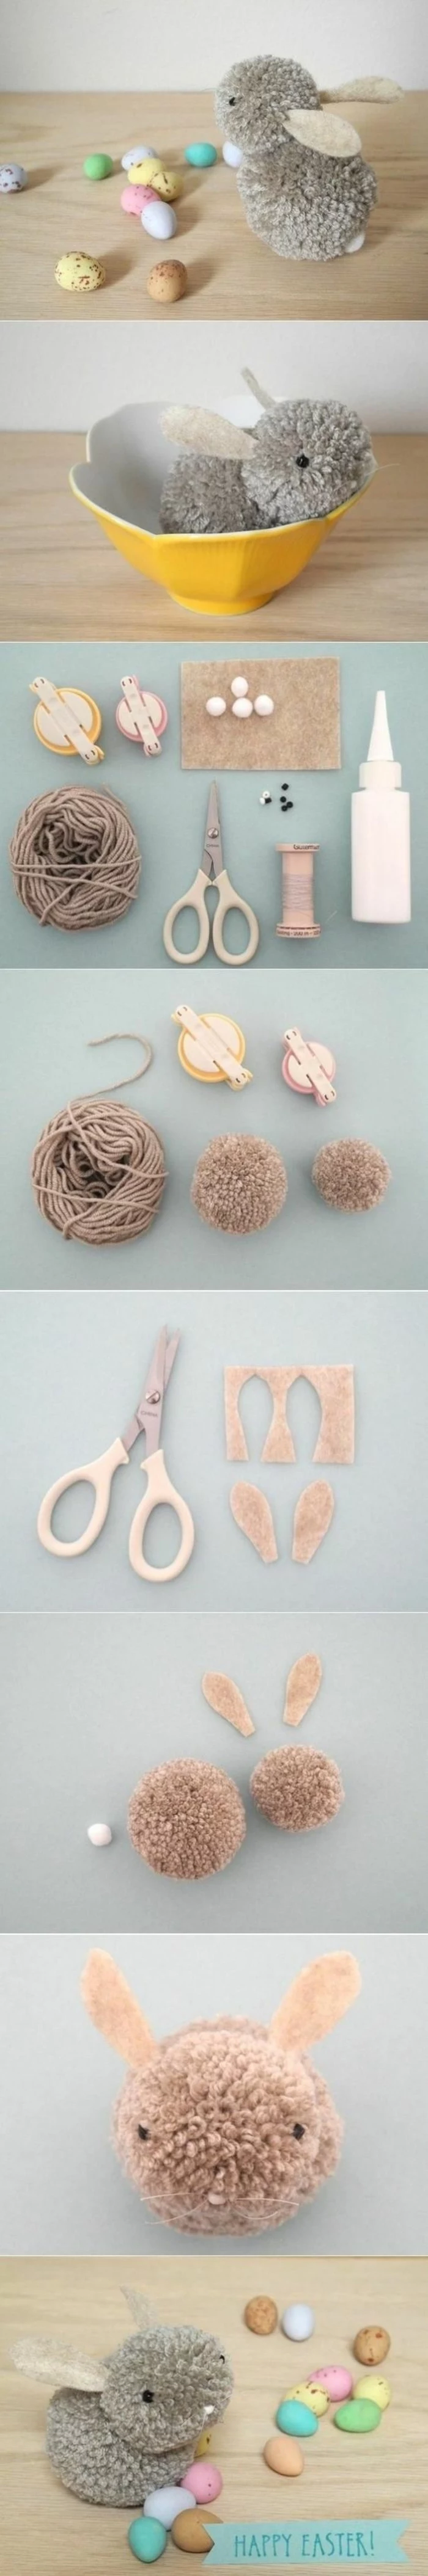 easter decoration, small bunny, made of grey yarn, cool diy projects, step by step tutorial